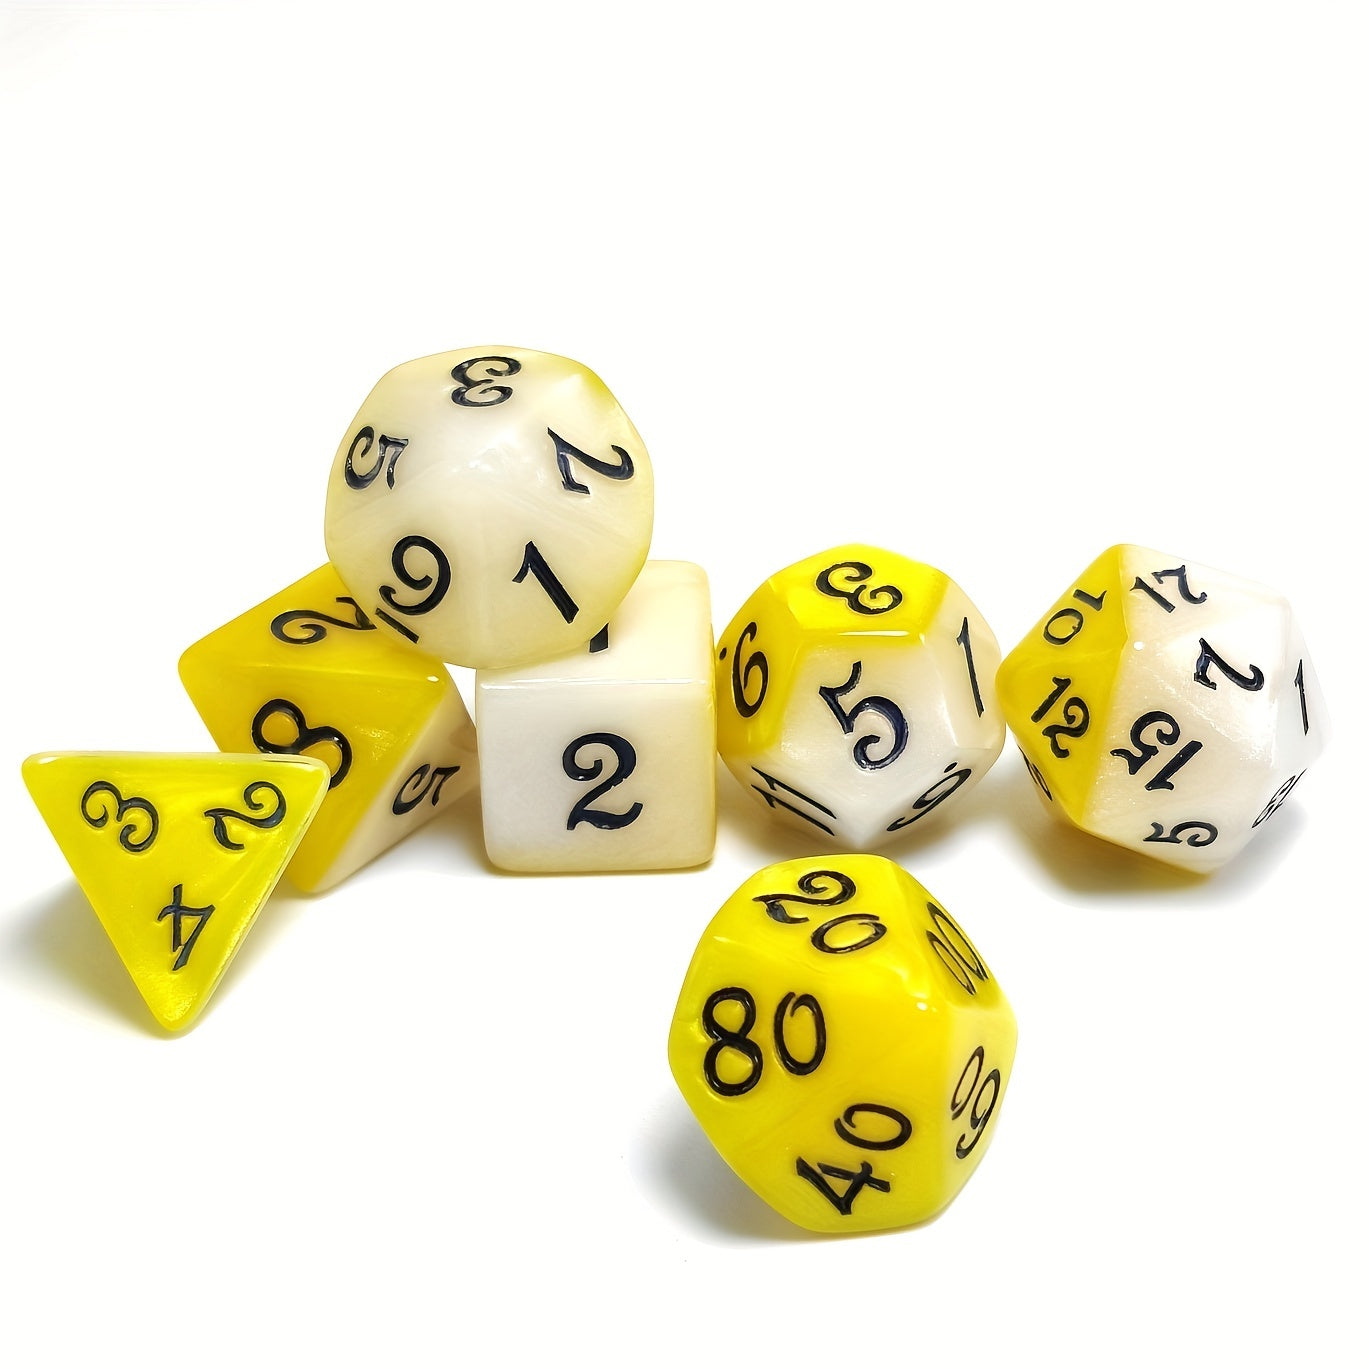 FREE Today: Yellow And Cream Colored Layered Dice Set